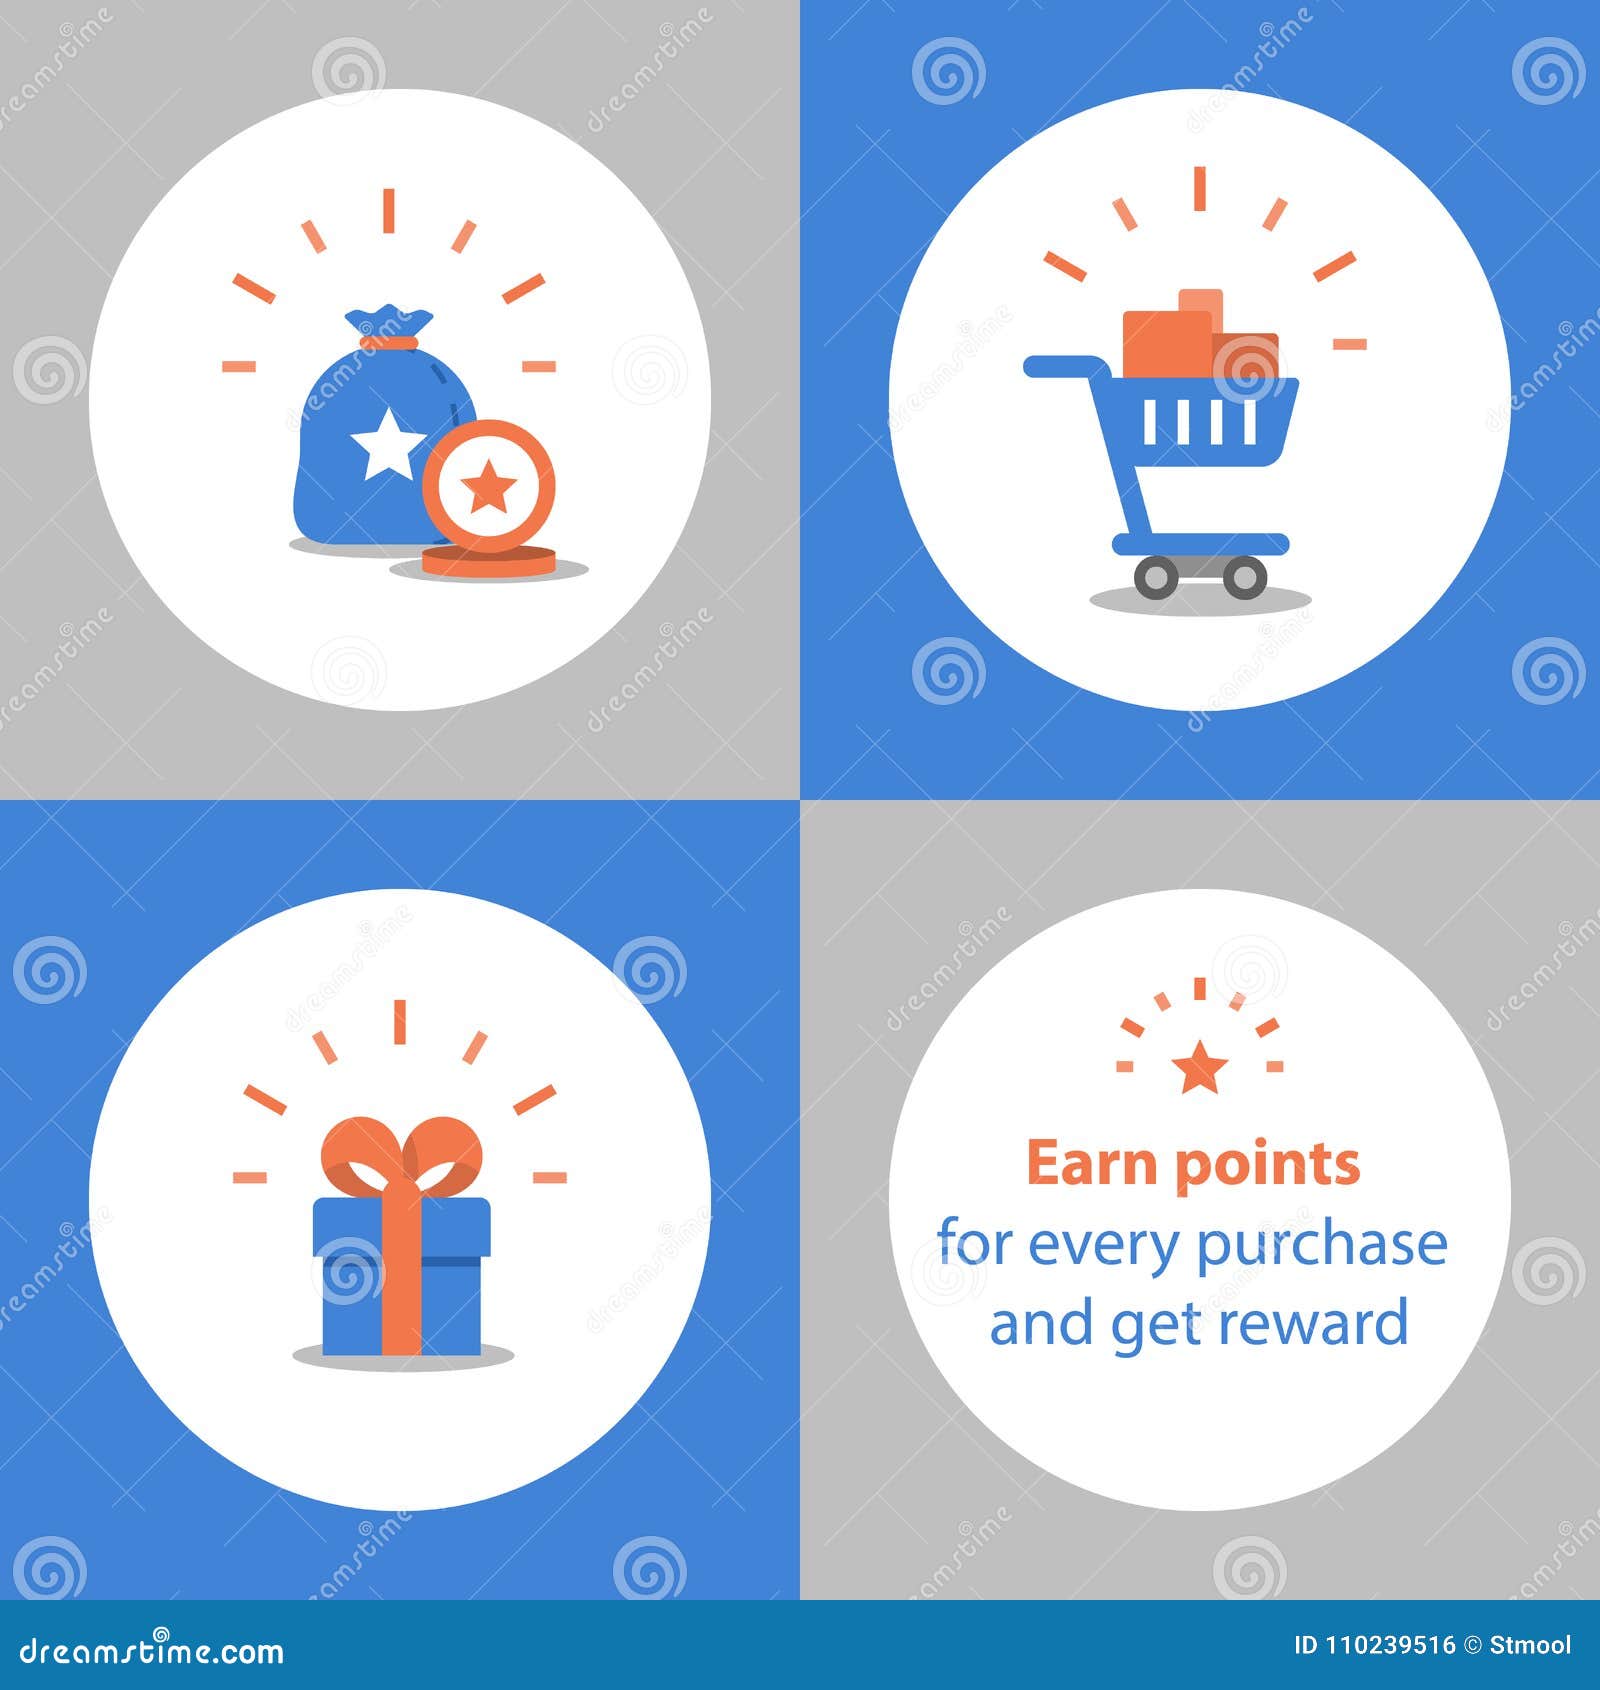 earn points for purchase, loyalty program, reward concept, full shopping cart, redeem gift